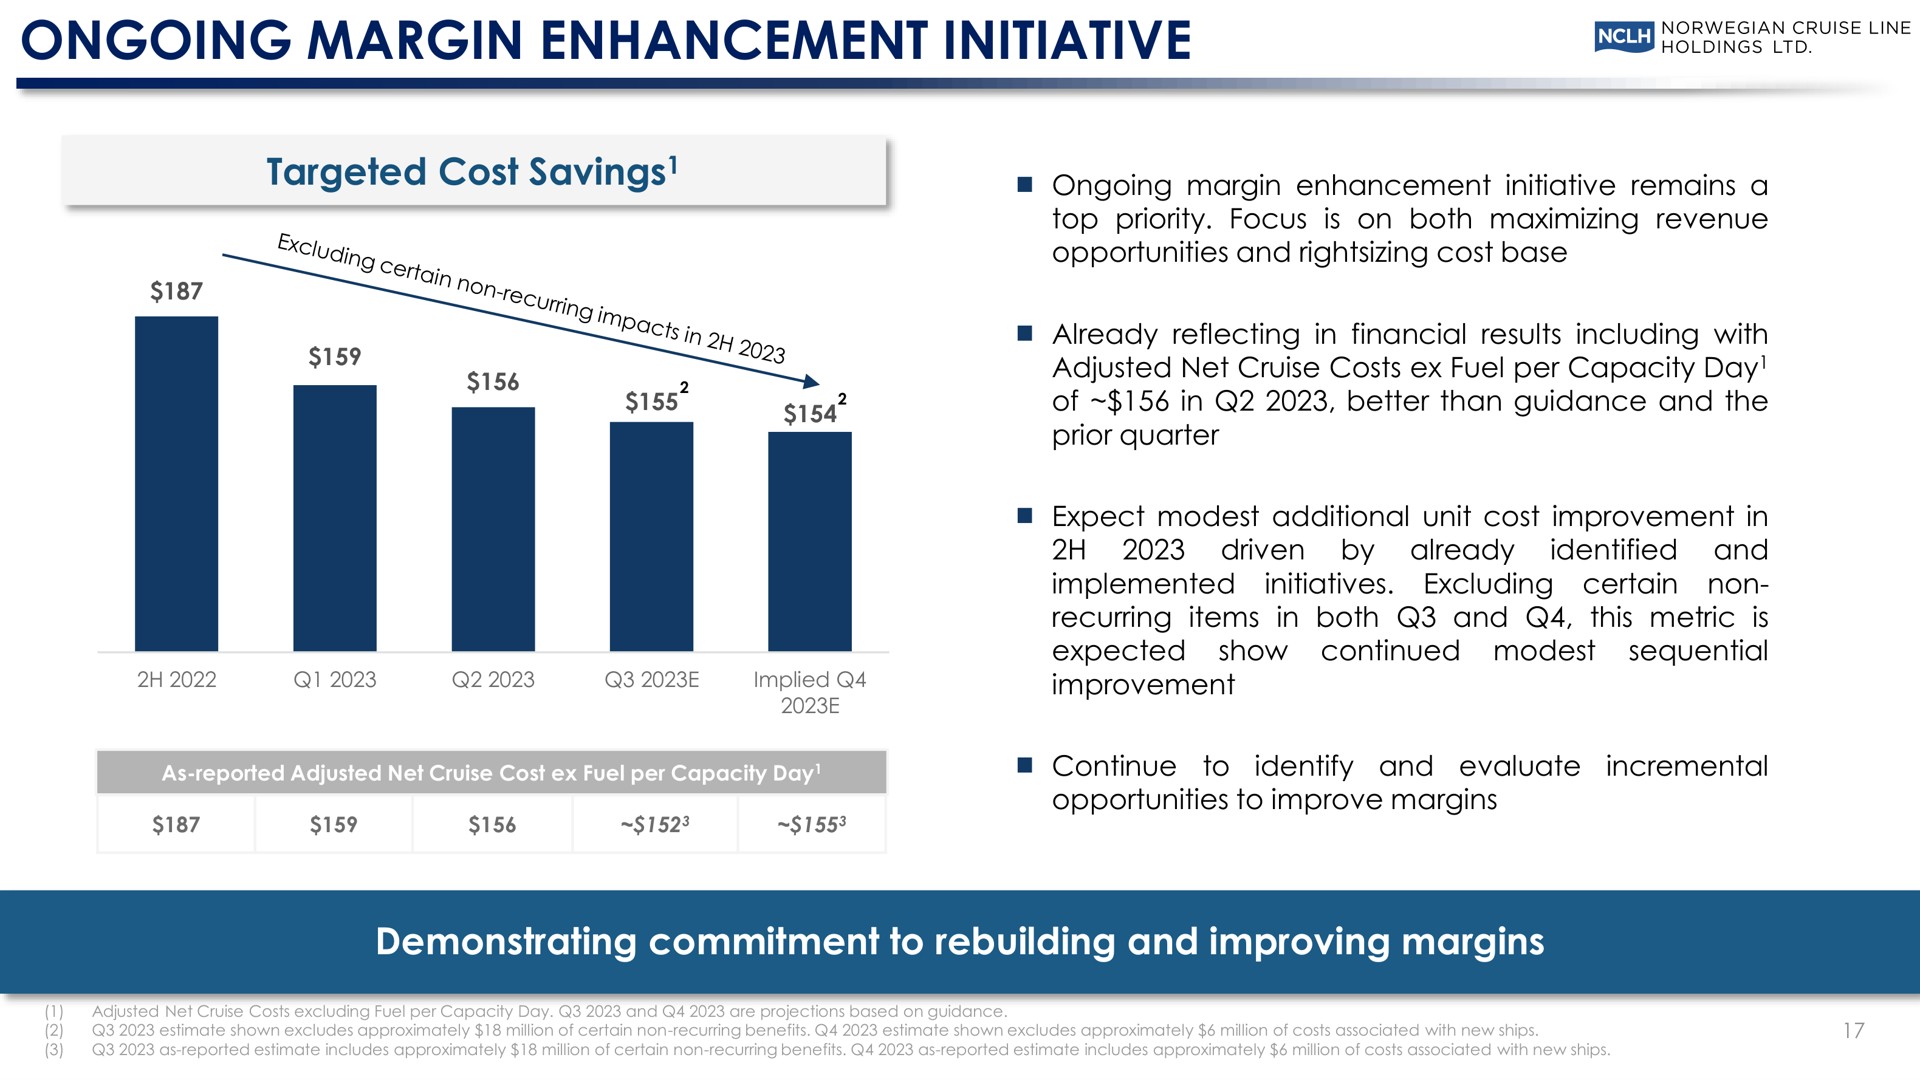 ongoing margin enhancement initiative targeted cost savings demonstrating commitment to rebuilding and improving margins tad | Norwegian Cruise Line